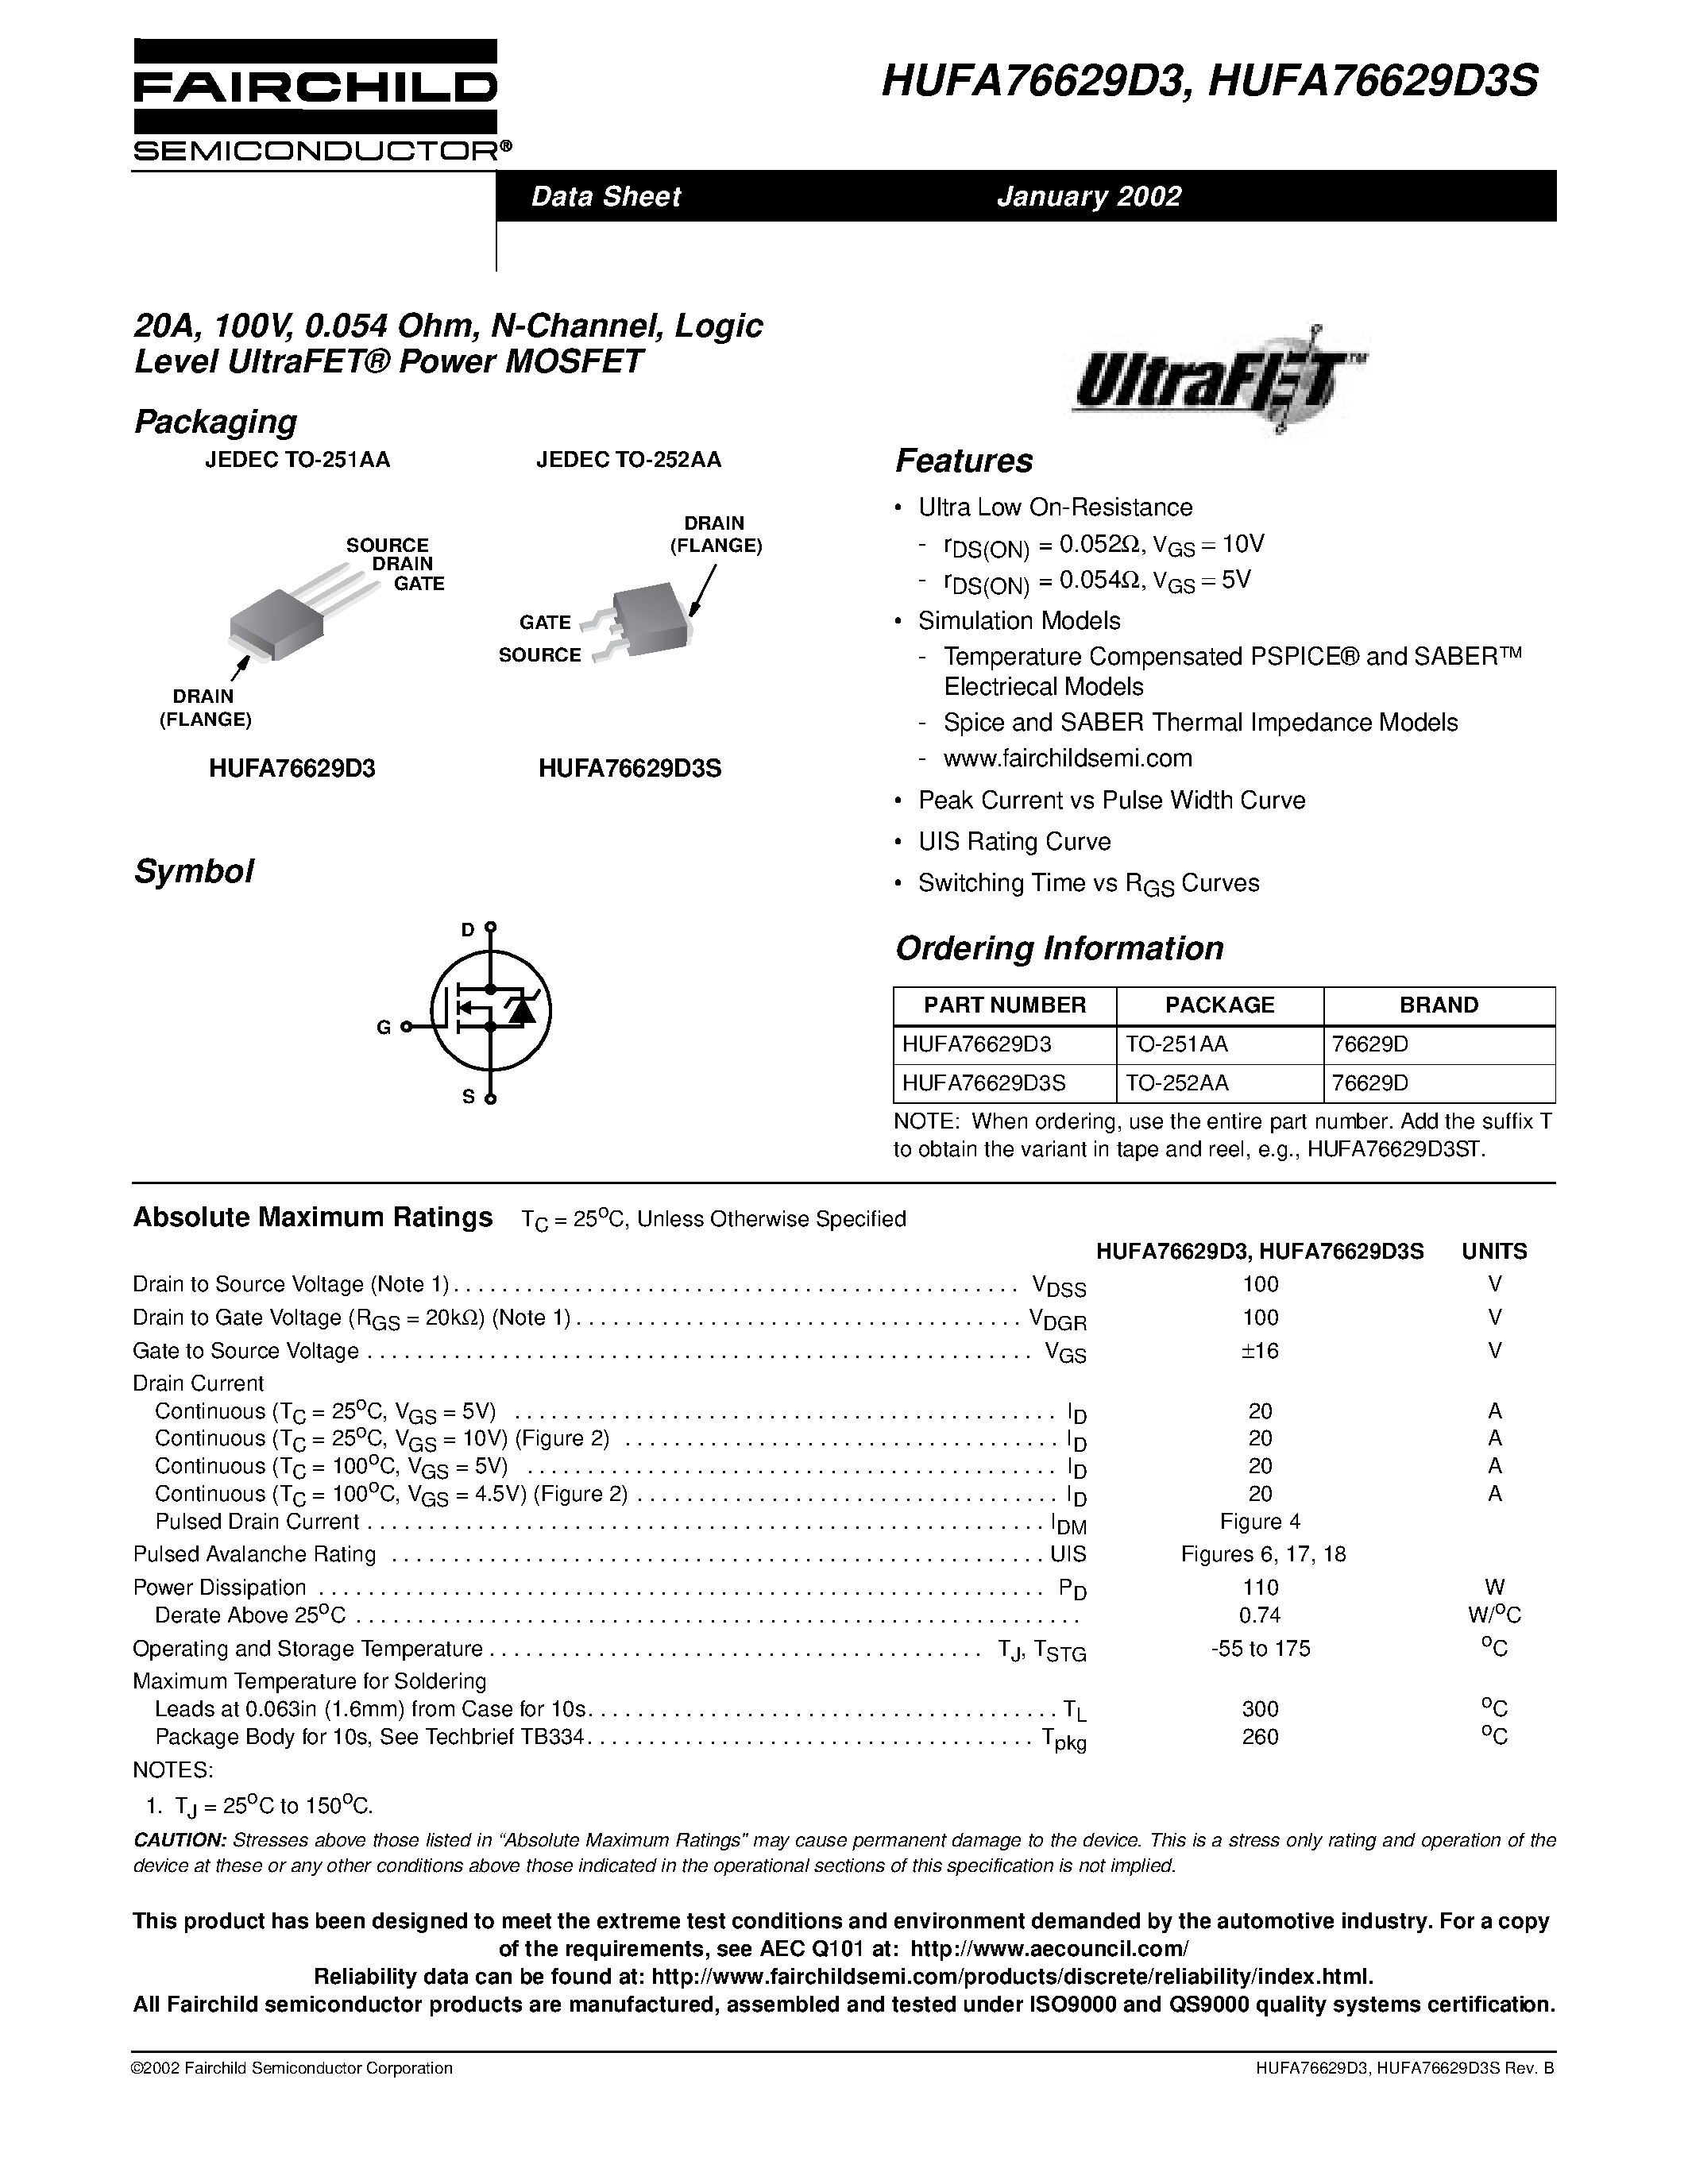 Datasheet HUFA76629D3S - 20A/ 100V/ 0.054 Ohm/ N-Channel/ Logic Level UltraFET Power MOSFET page 1